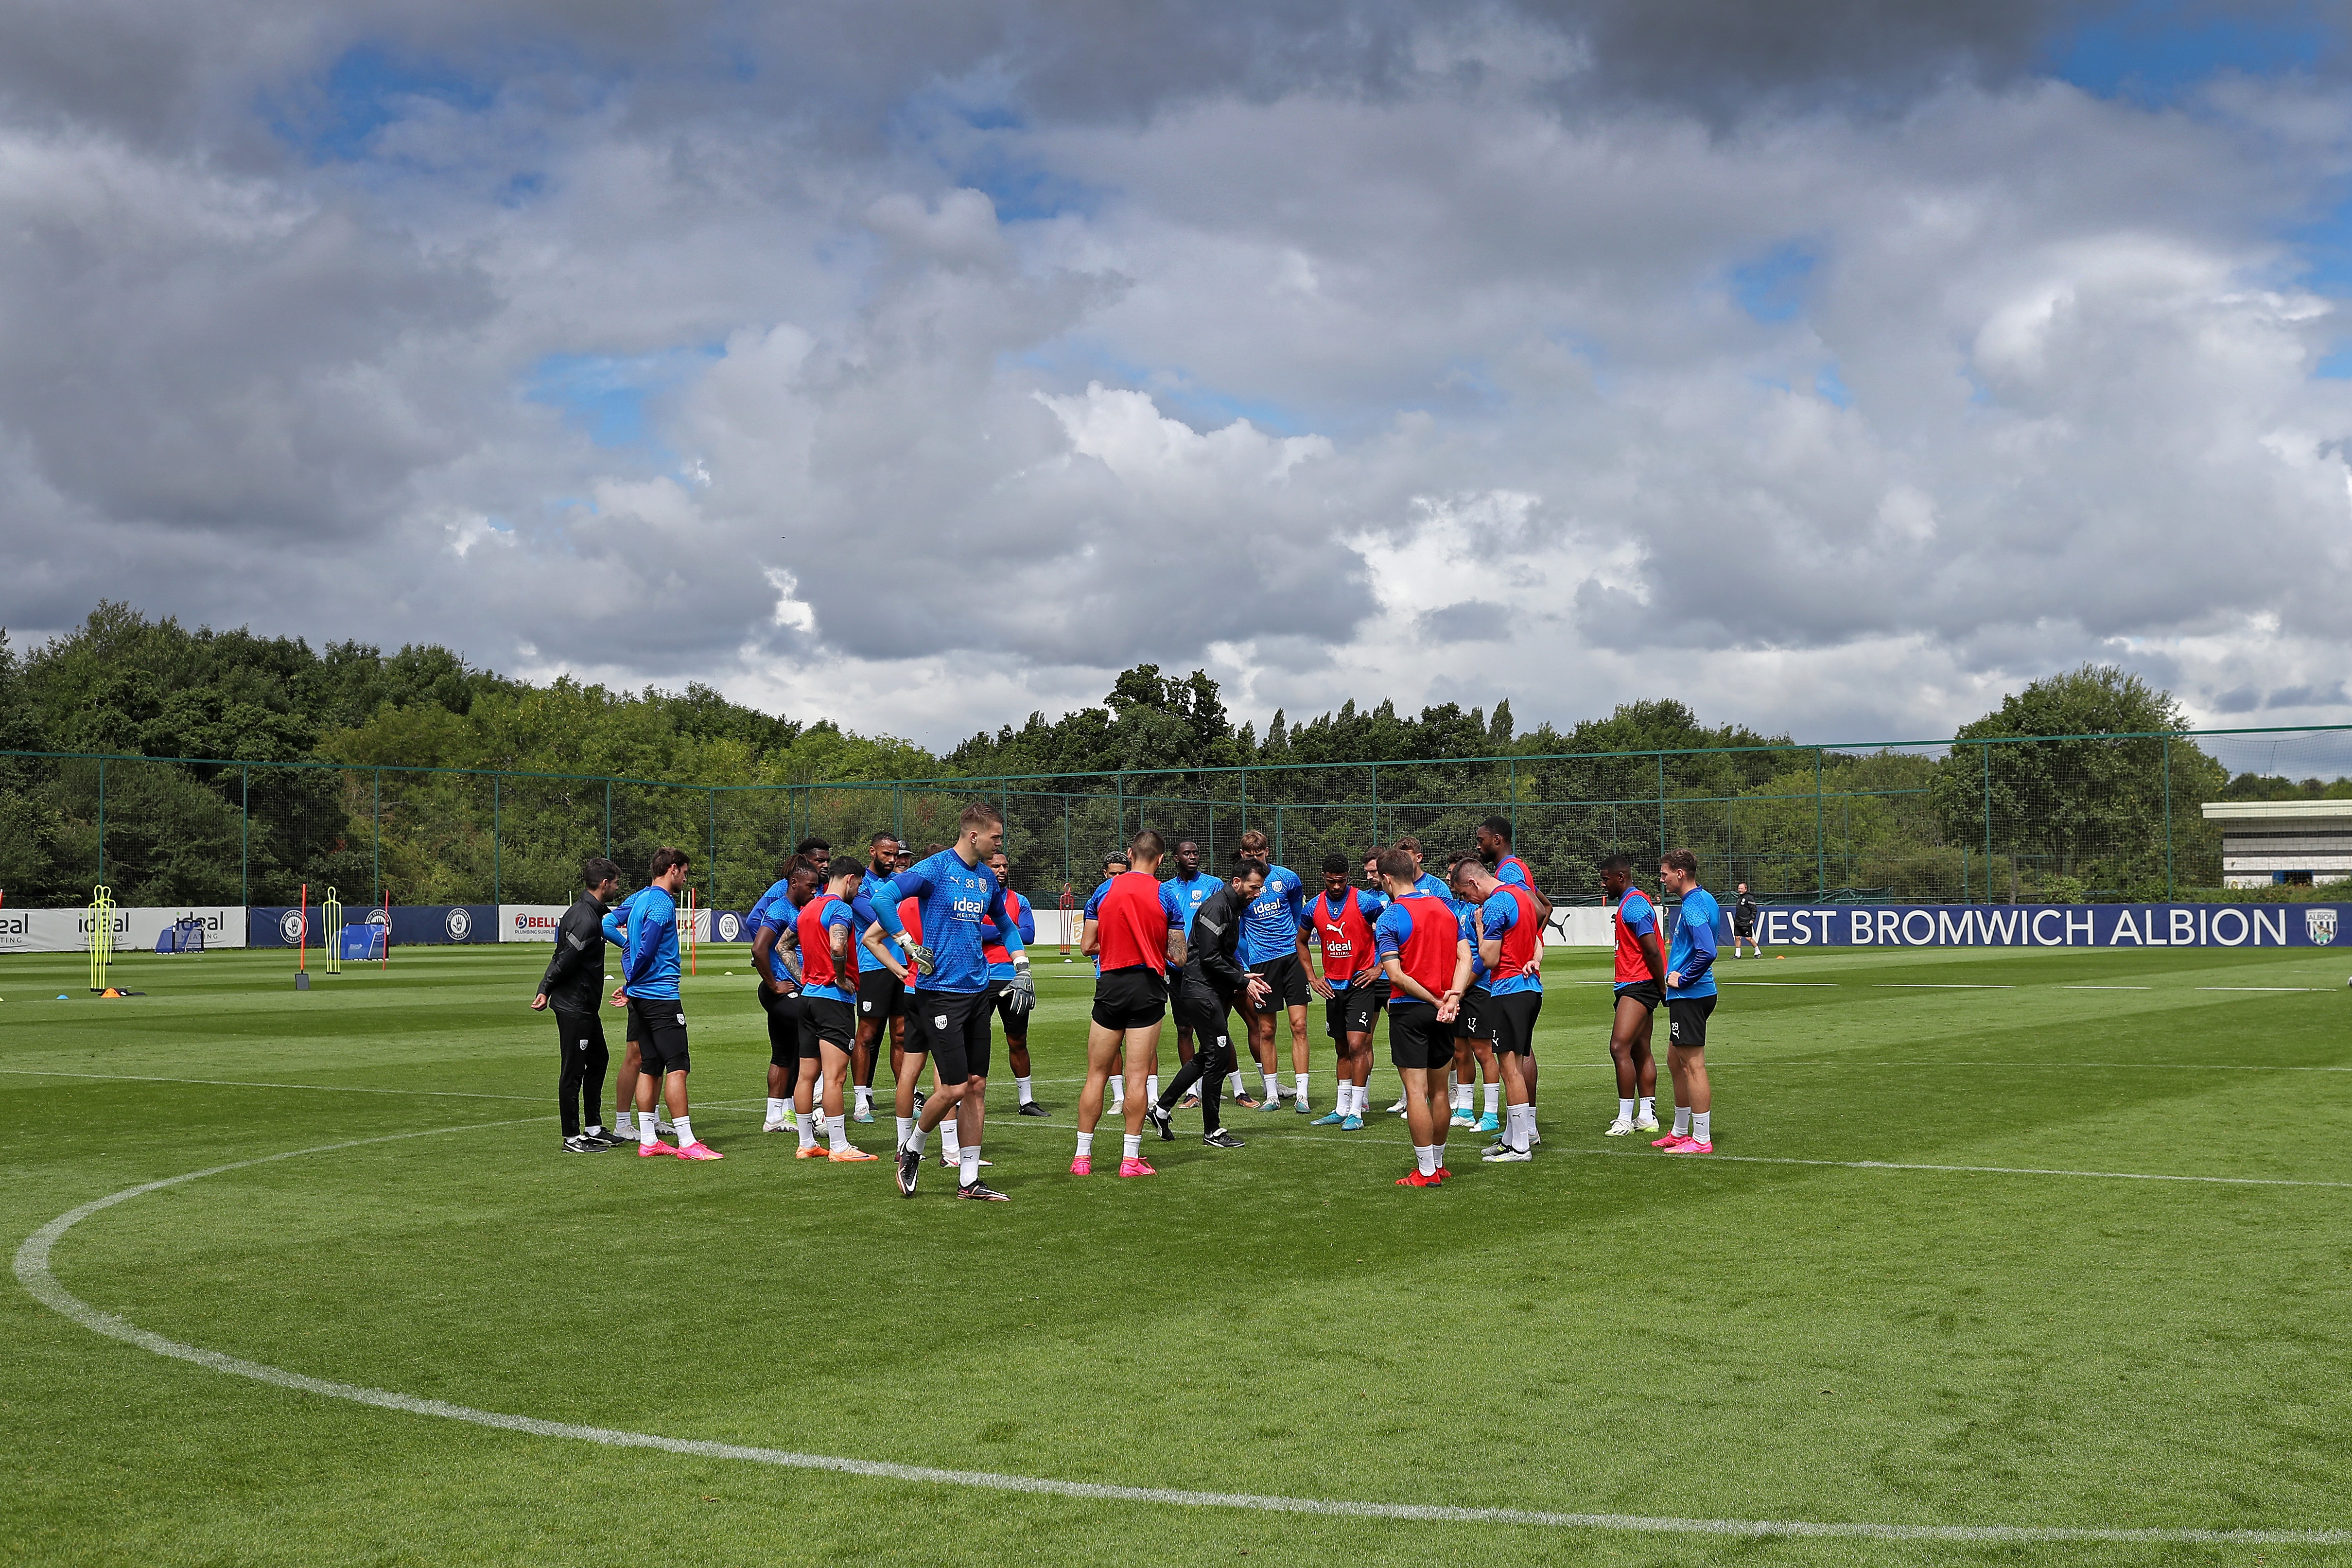 The players in a huddle on the training pitch